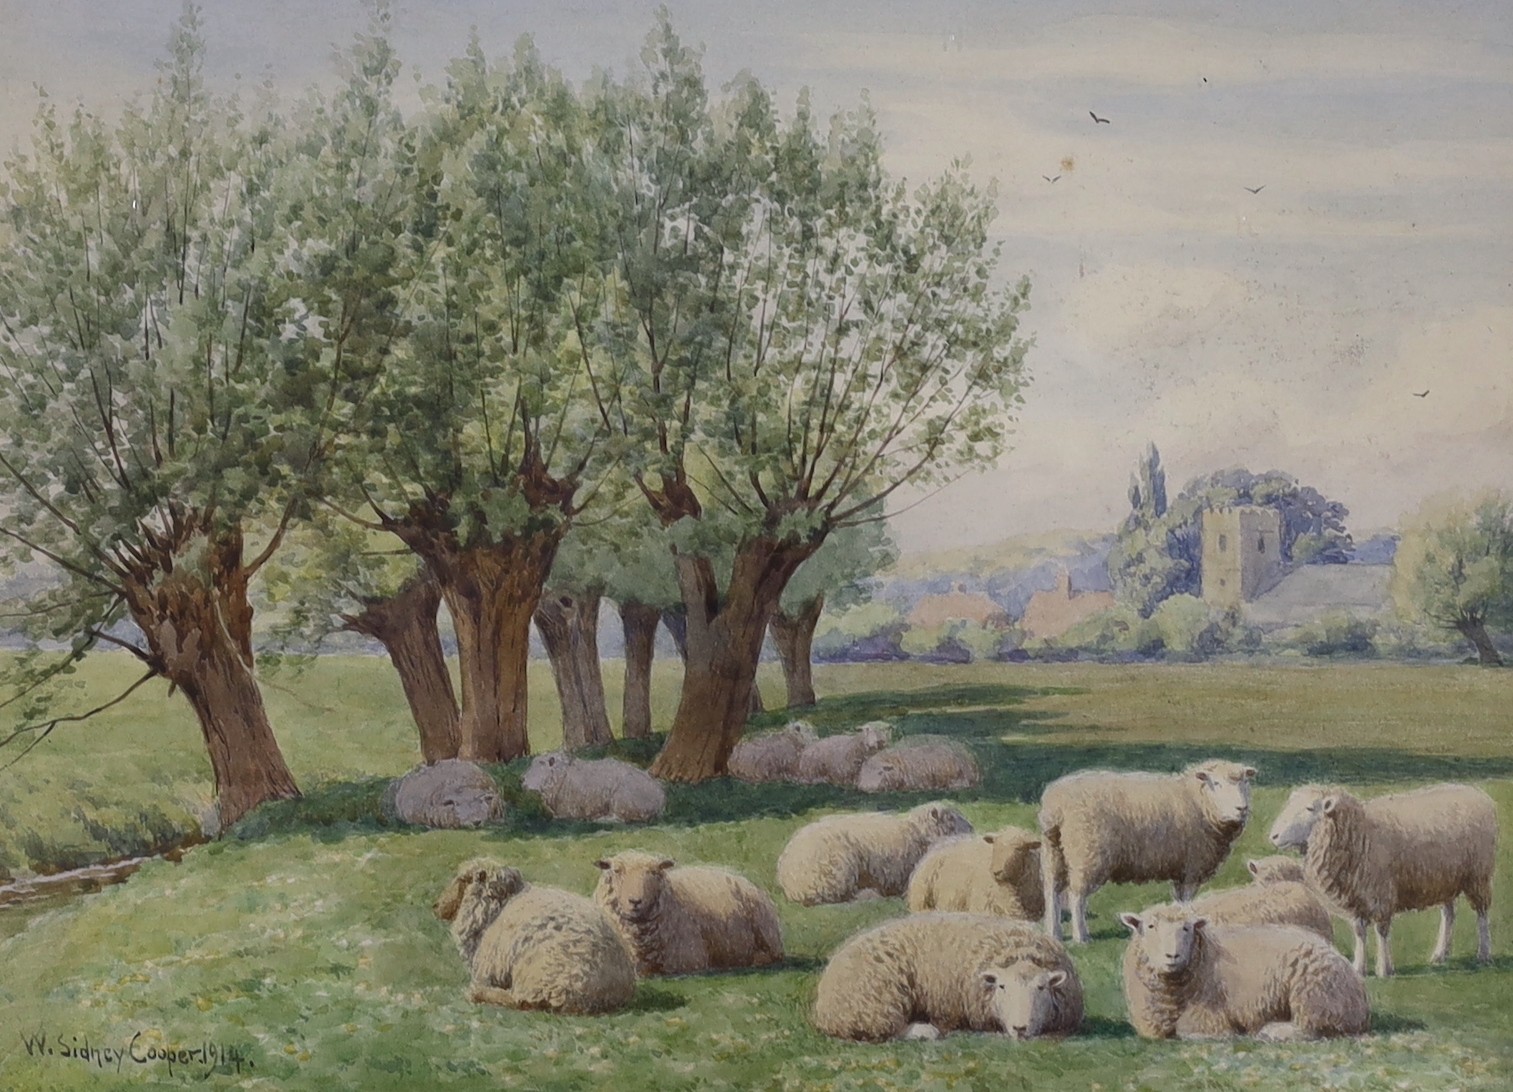 William Sidney Cooper (1854–1927), watercolour, 'Near Minster', signed and dated 1914, 21 x 28cm